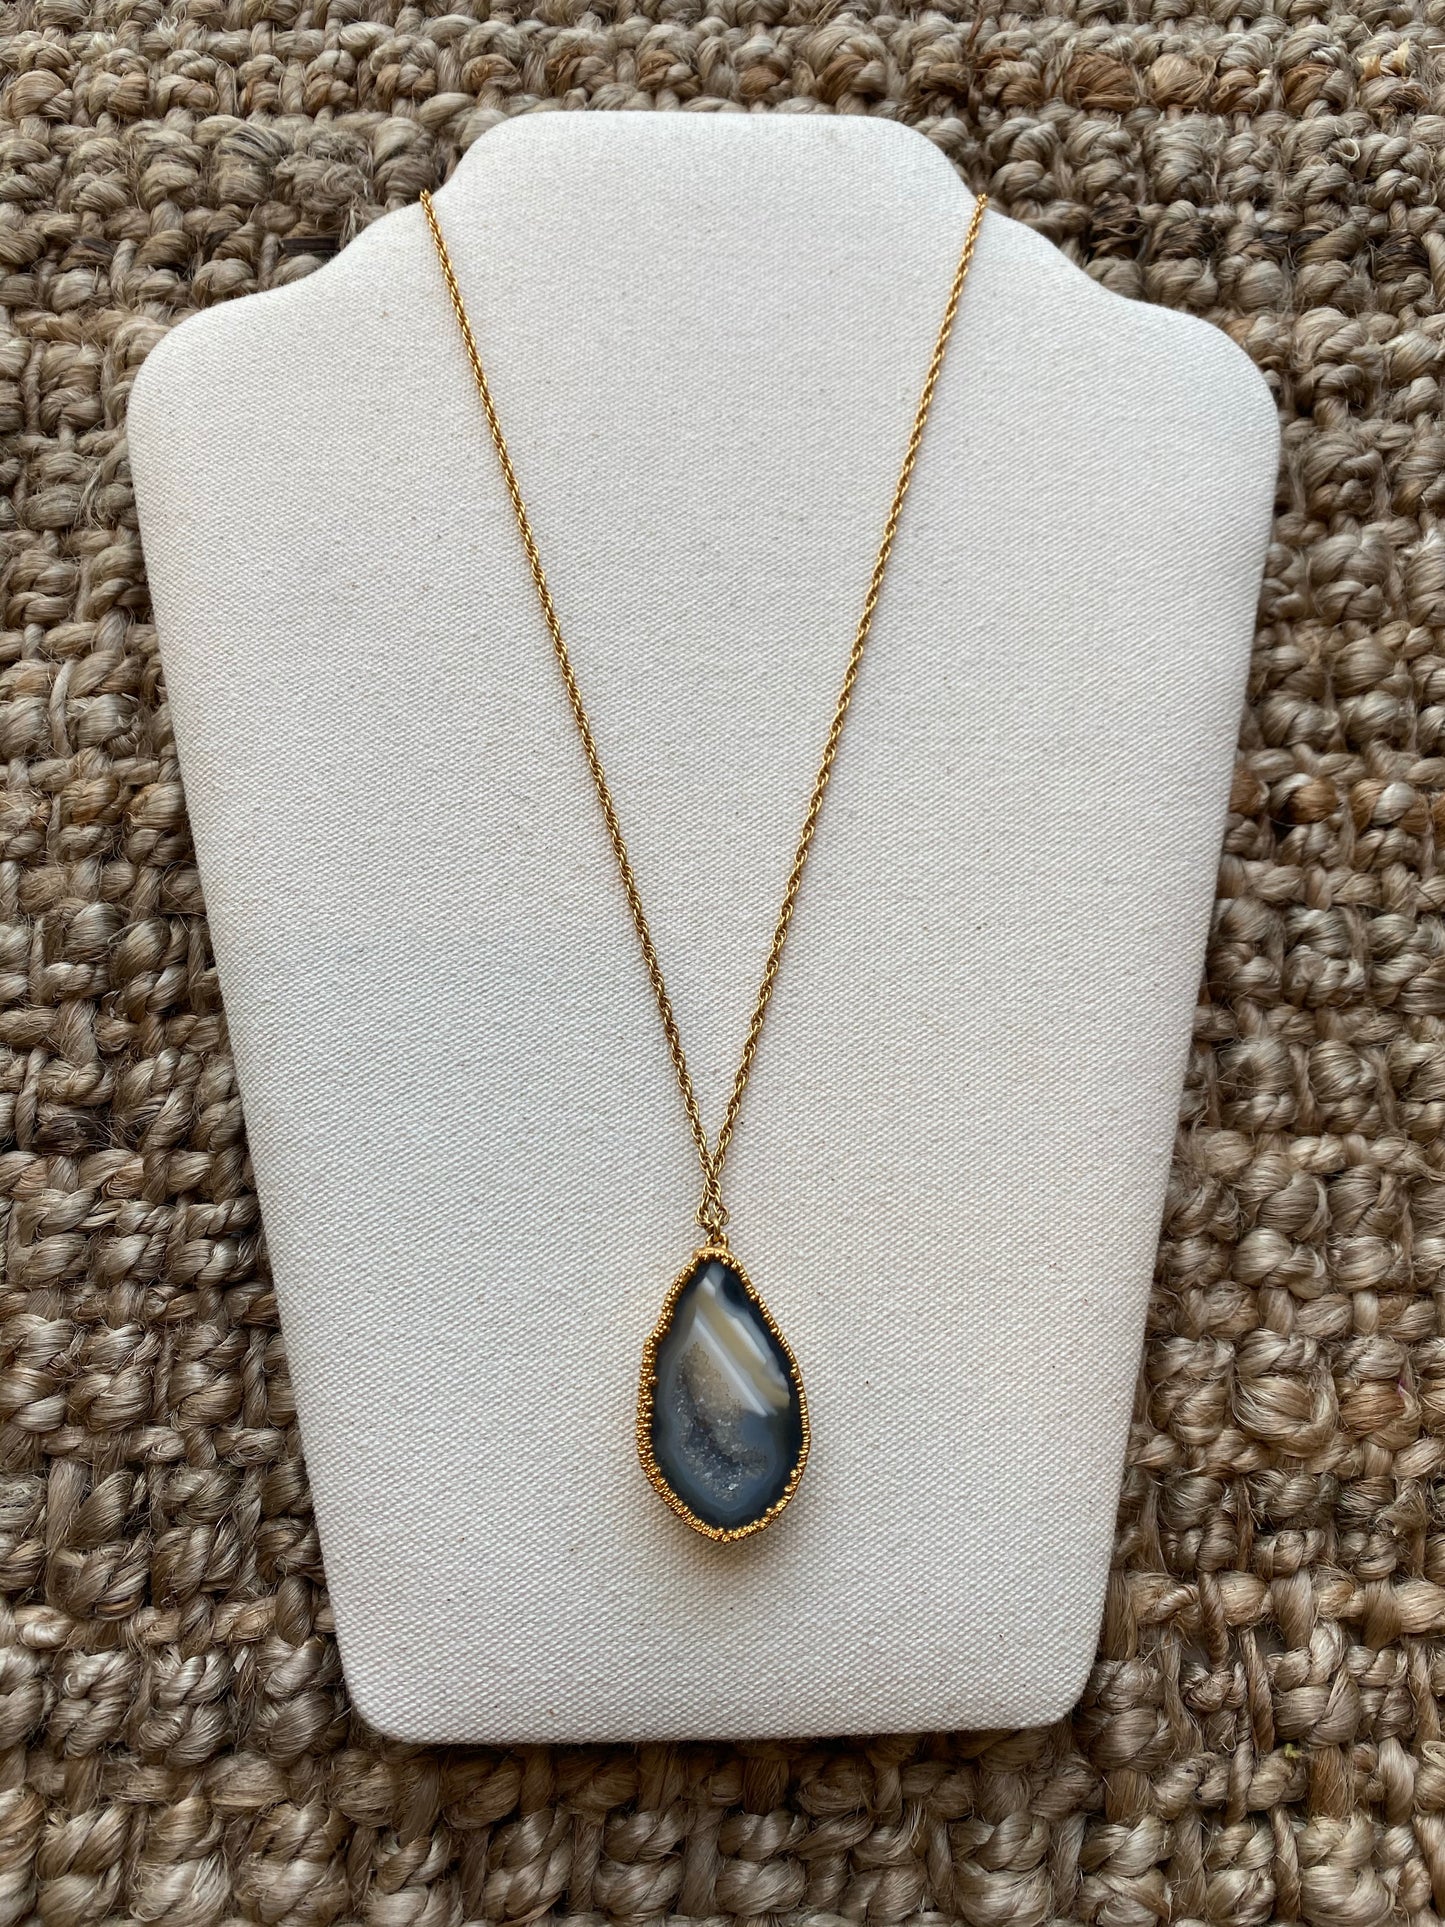 Banded agate with Druzy Stone pendant